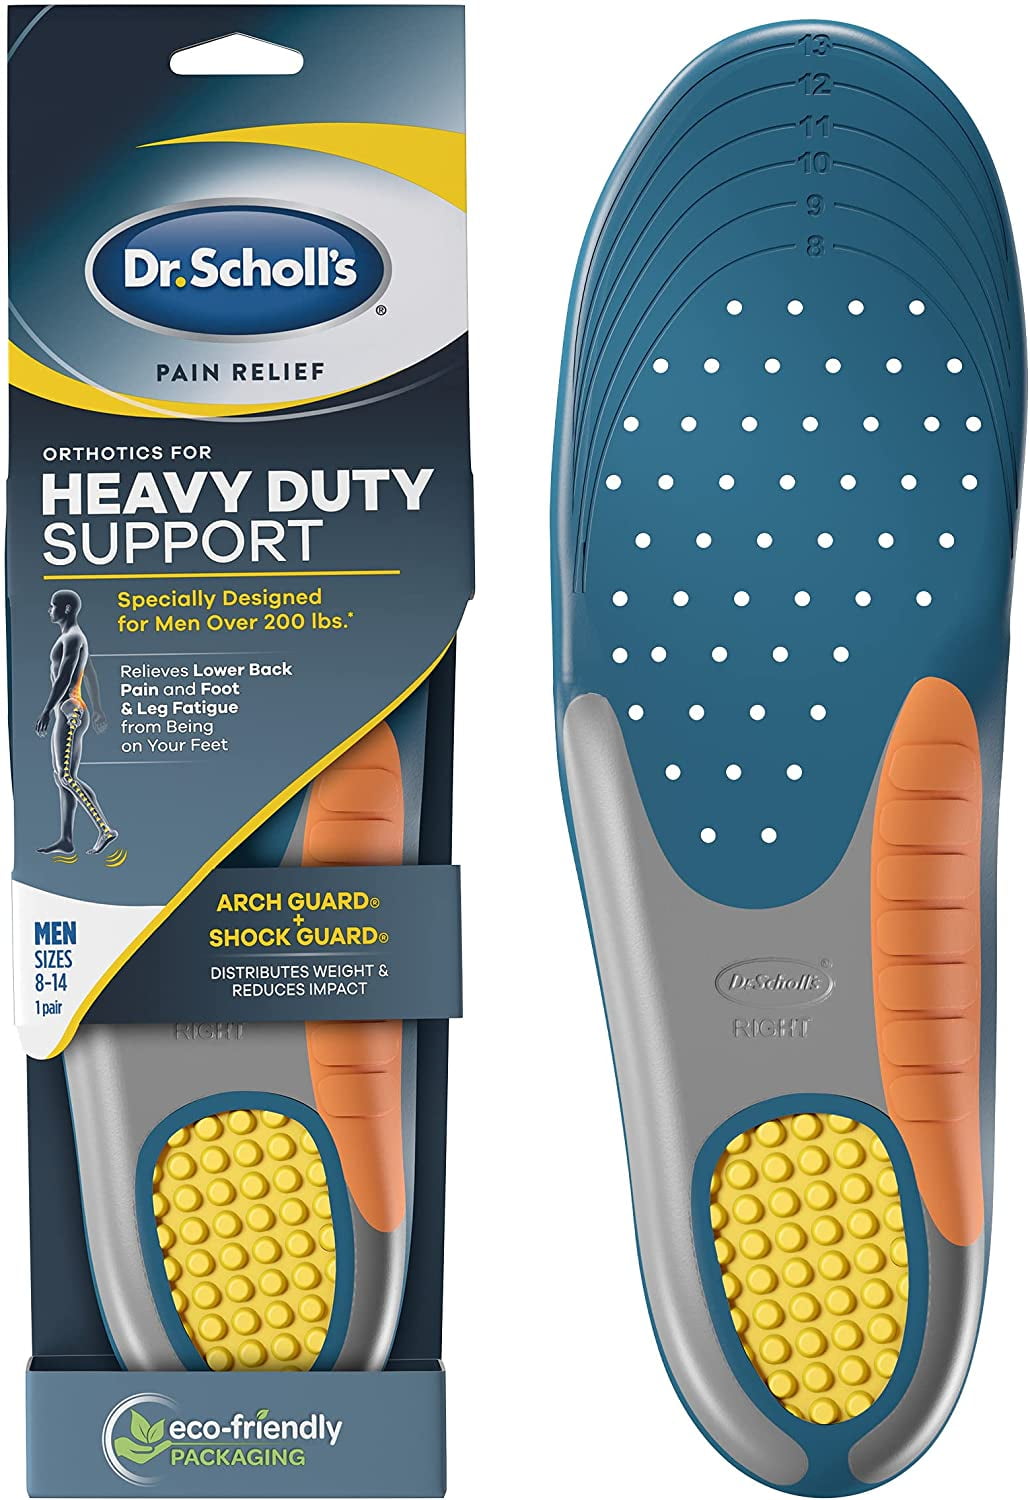 Torrent Beoefend Verdorren Dr. Scholl's Heavy Duty Support Pain Relief Orthotics, Designed for Men  over 200lbs with Technology to Distribute Weight and Absorb Shock with  Every Step (for Men's 8-14) - Walmart.com